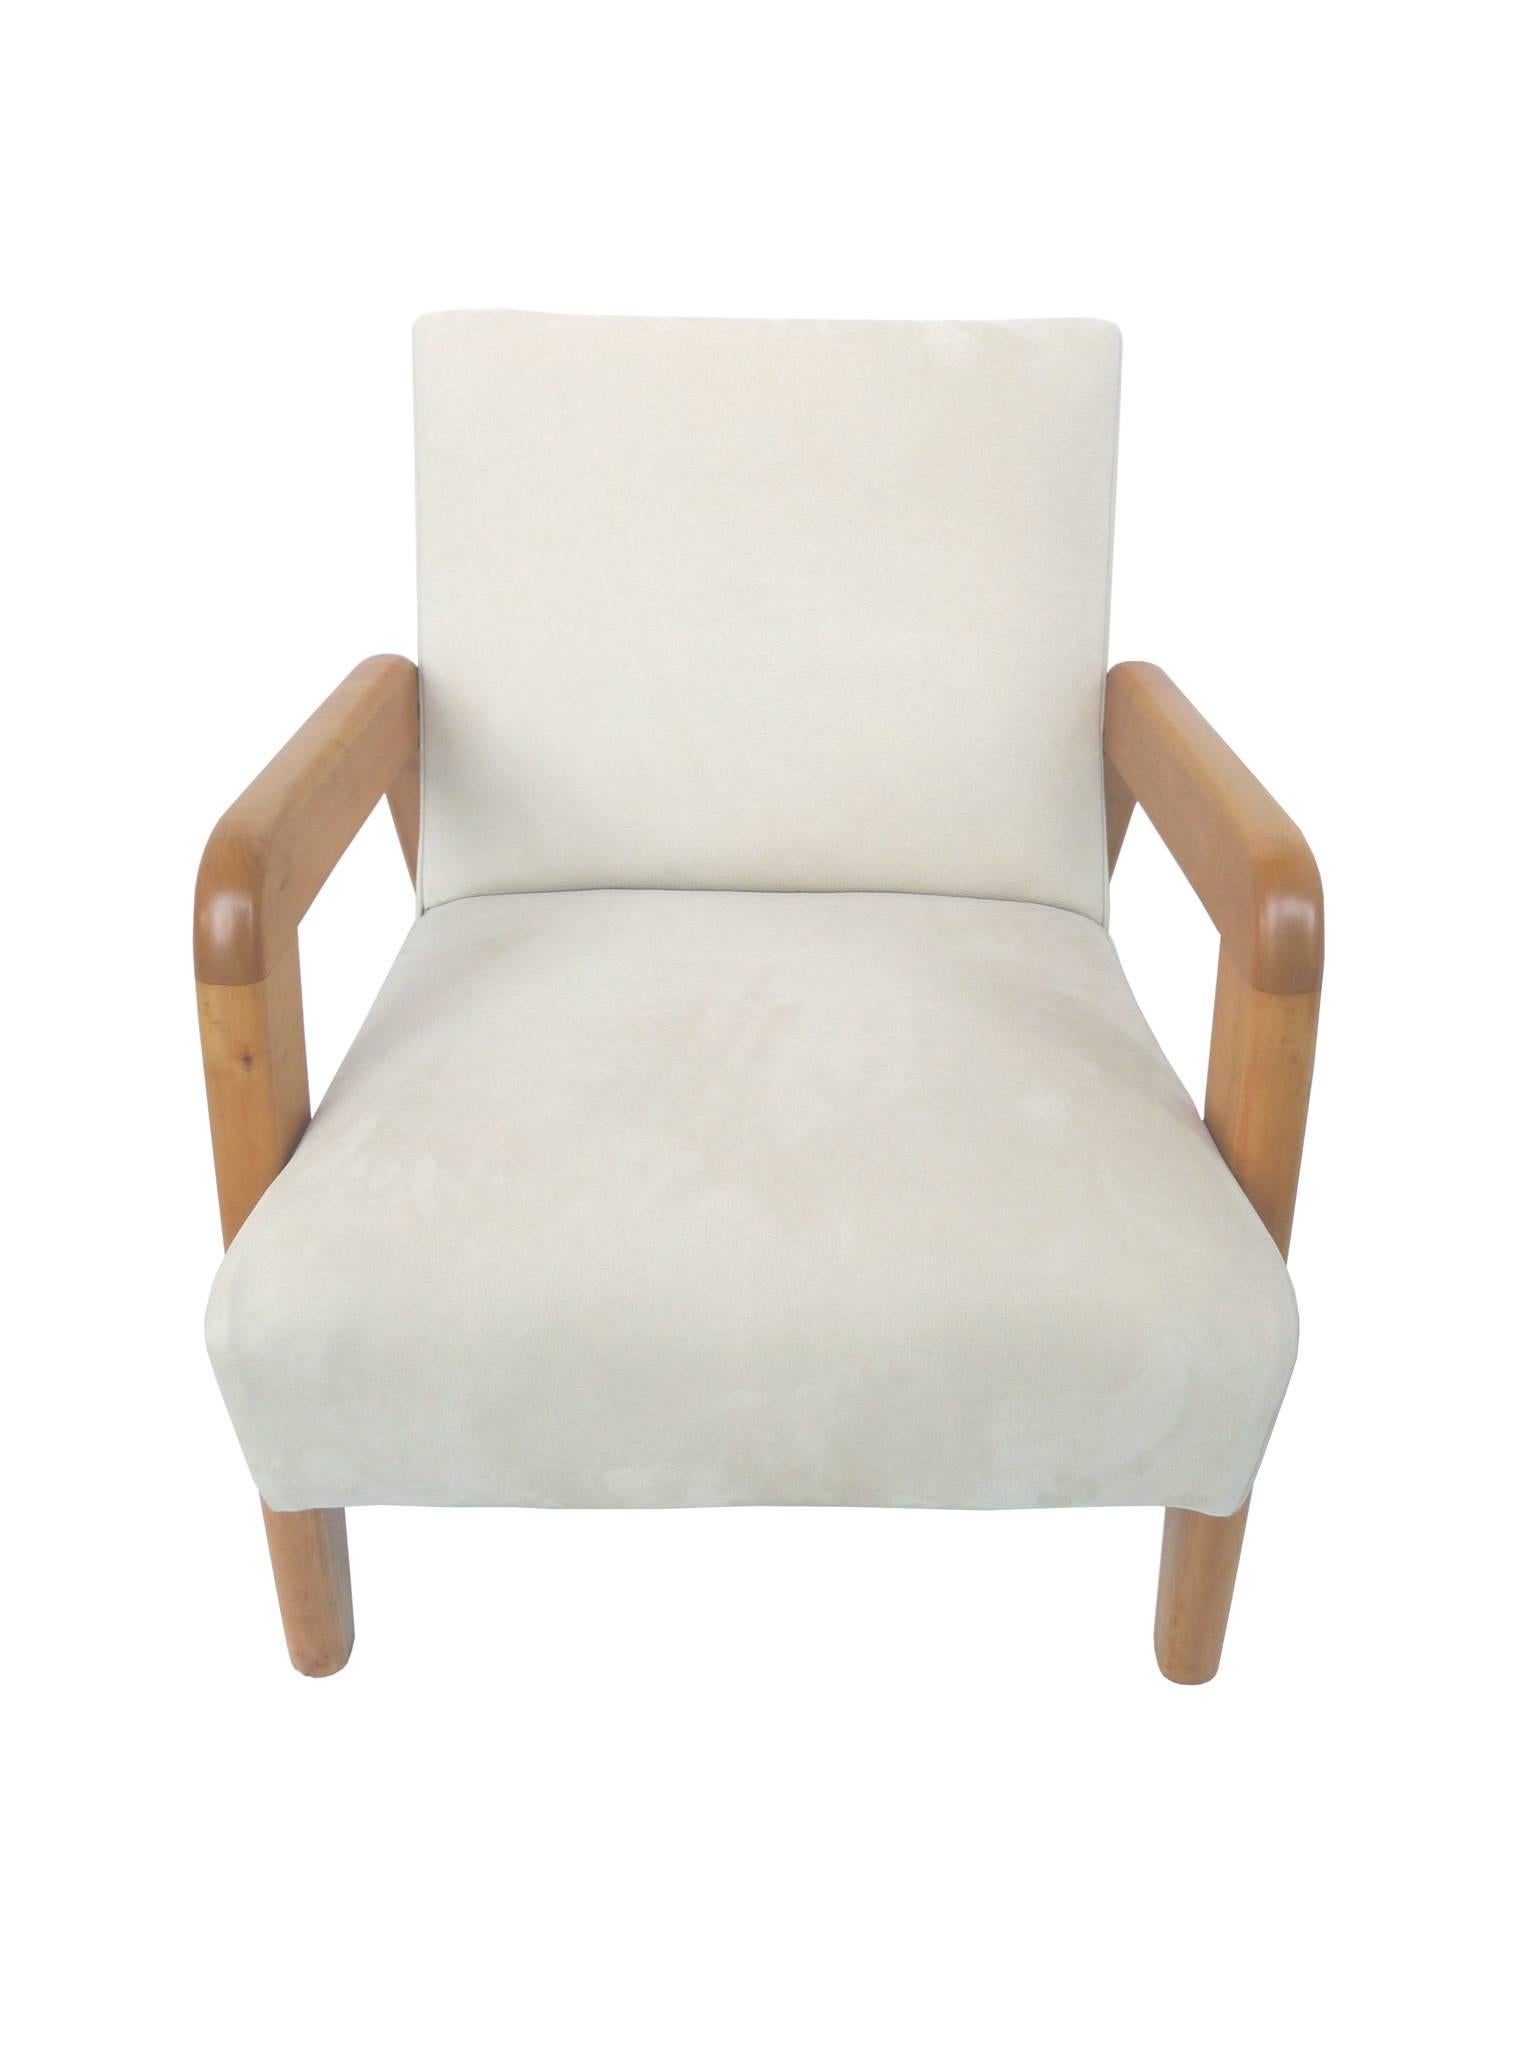 These exceptional mid-20th century armchairs are newly reupholstered in an ecru-white leather. Their arms and legs are rock maple wood. Similar to Edward Wormley's Classic Dunbar designs, the structure of these chairs is distilled to minimal shapes